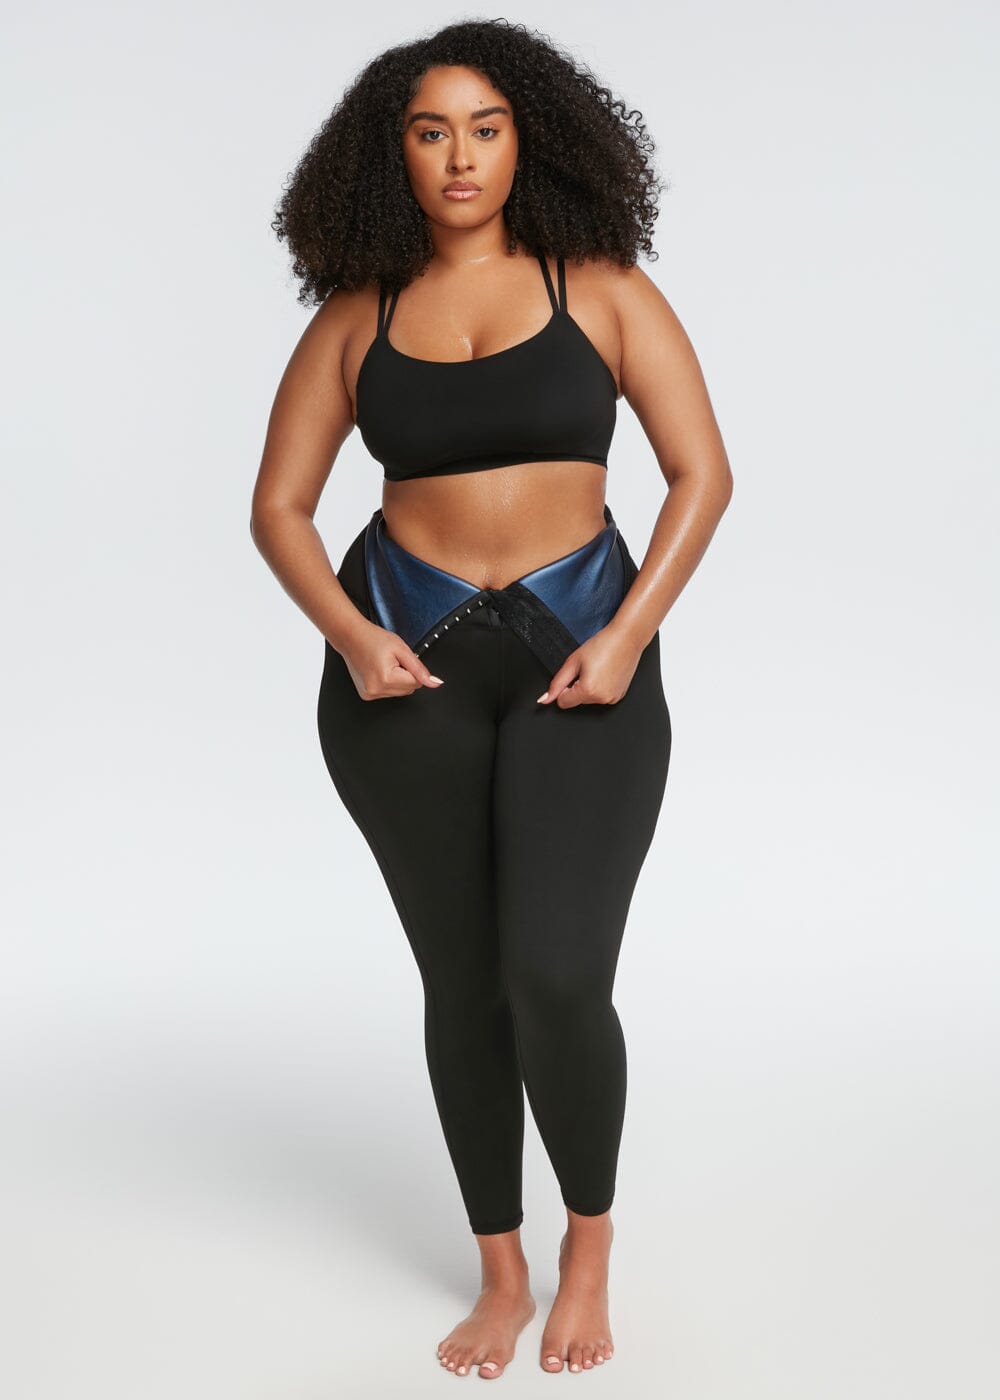 High Waist Compression Sauna Leggings For Women Sweatpants For Slimming,  Lower Tummy Control Pants, Thermo Workout Training, And Body Shaping  YQ231013 From Tales04, $12.01